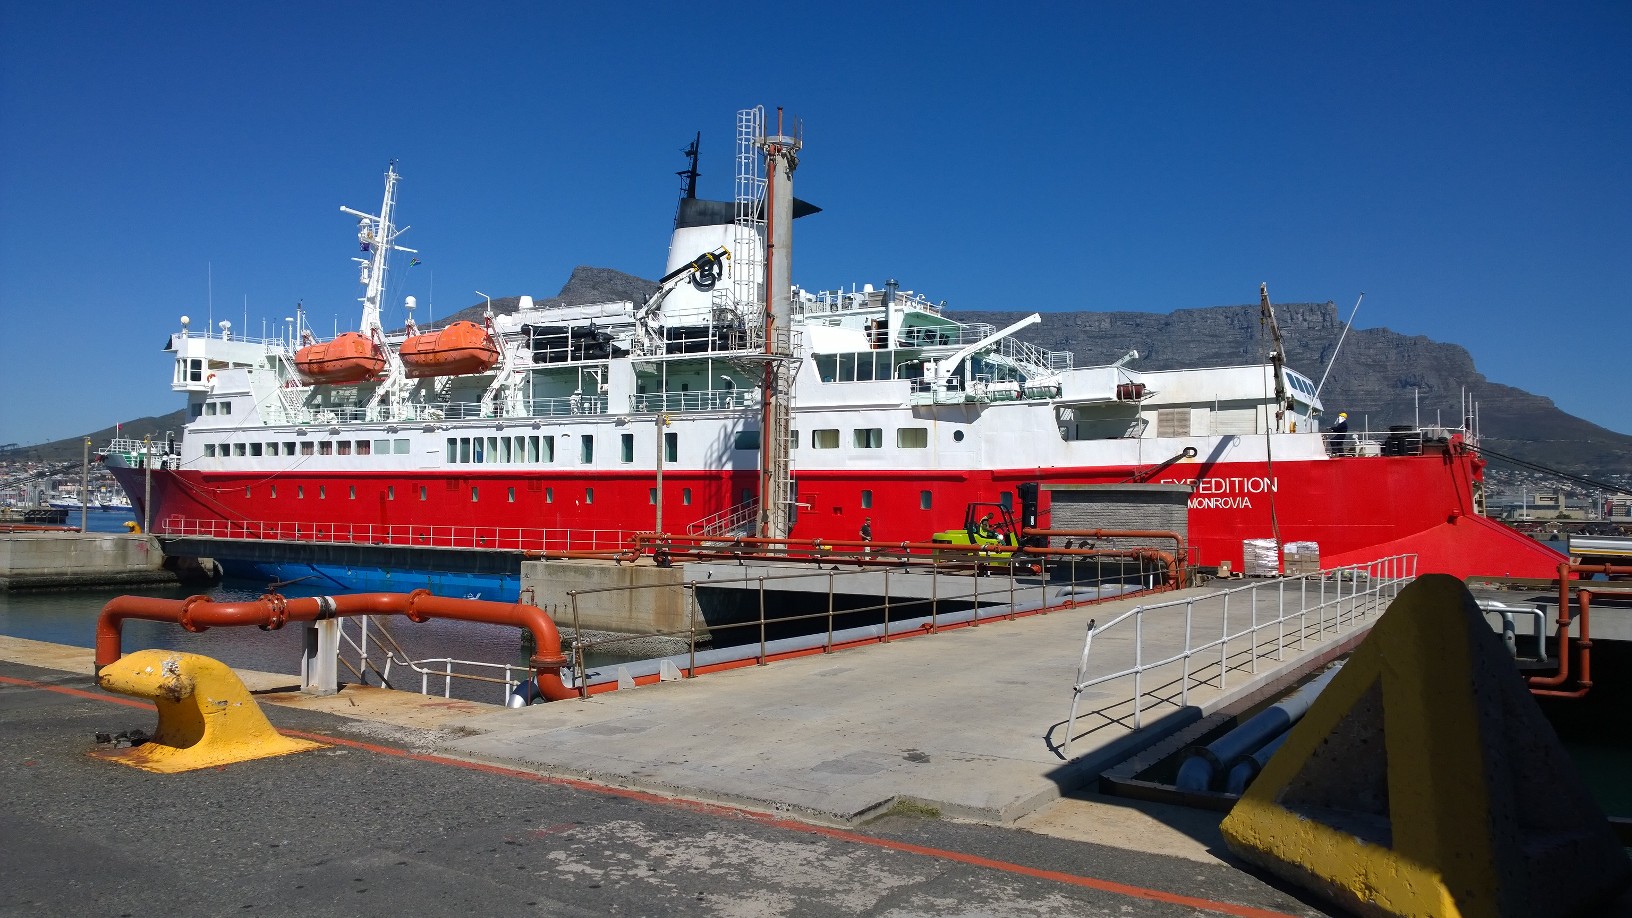 MS Expedition docked in Cape Town harbour on 6 April.